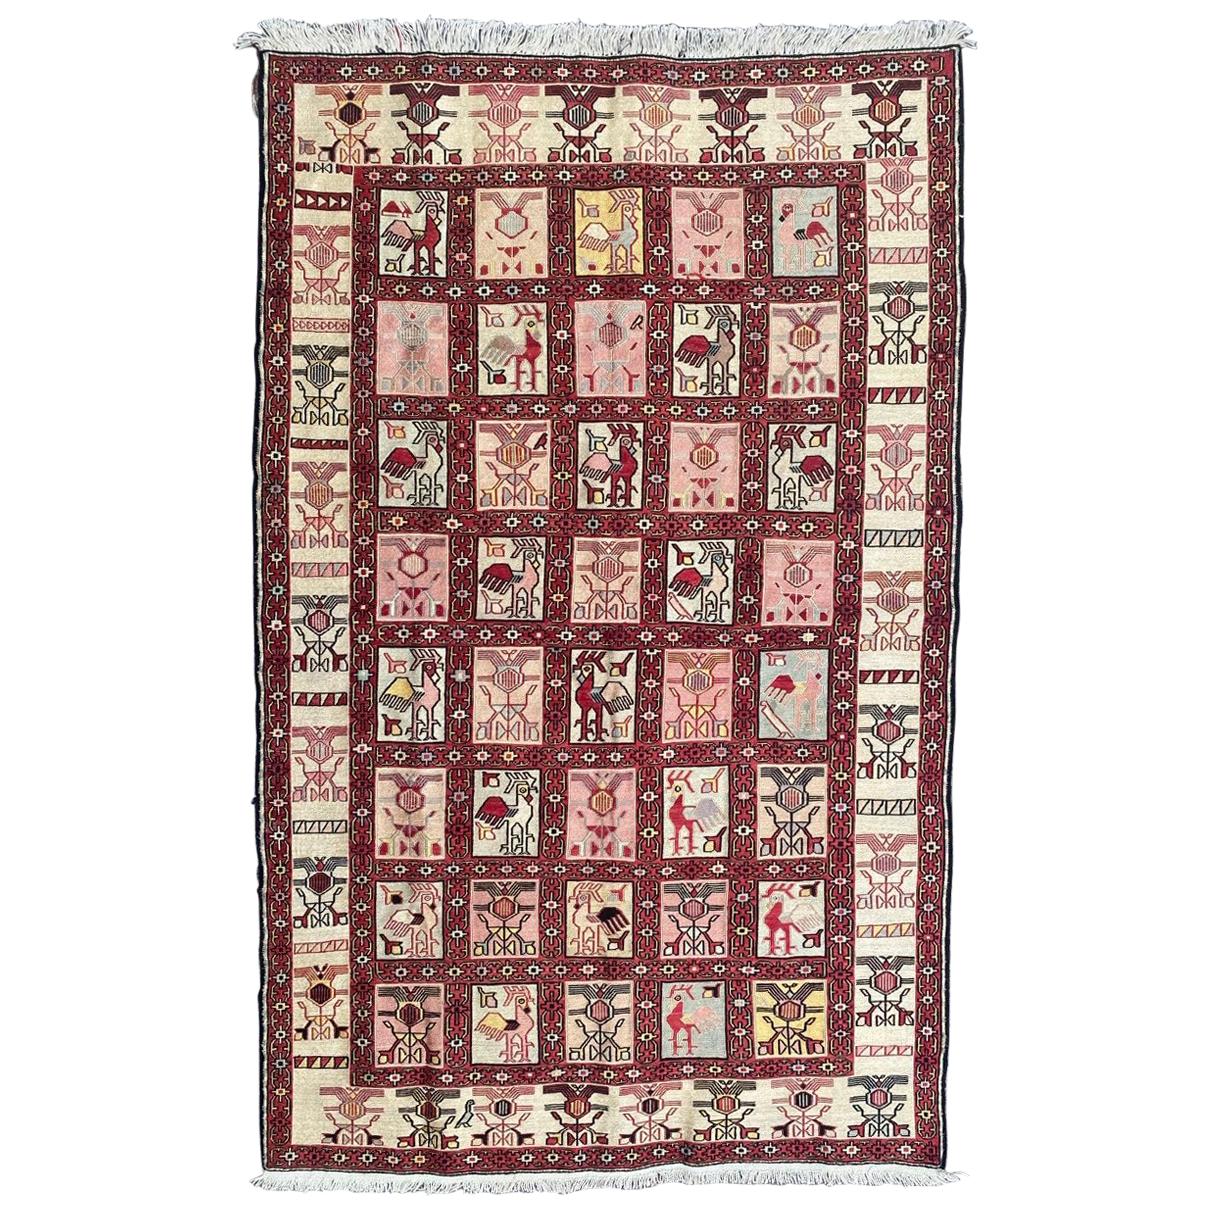 Bobyrug’s Very Beautiful Silk Verneh Soumak Embroidered Flat Rug For Sale